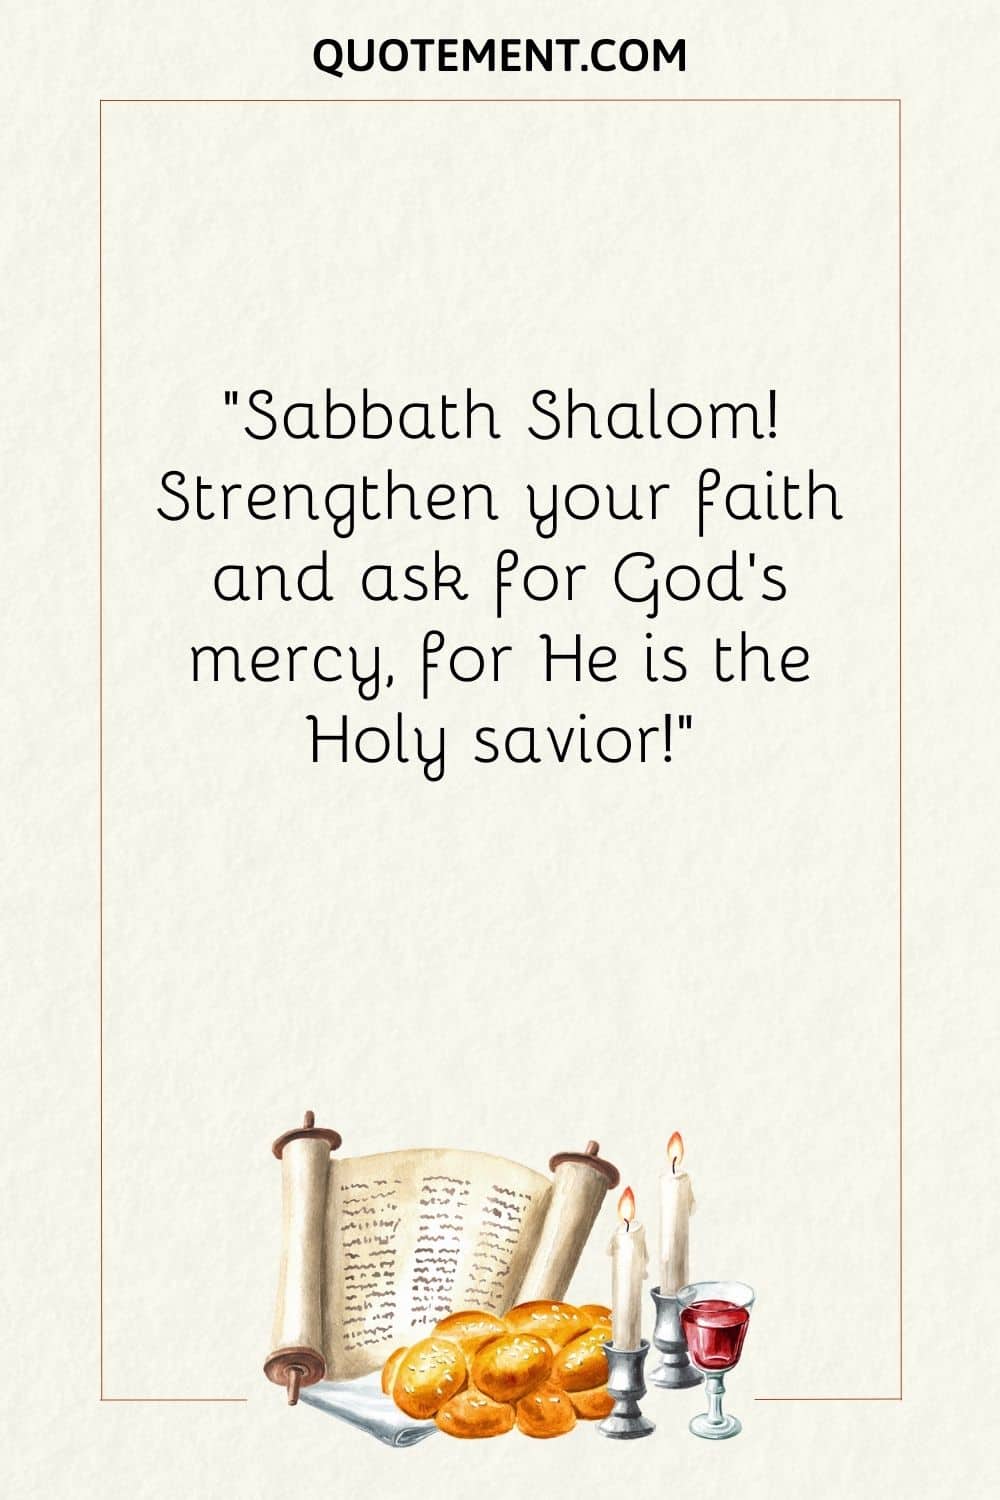 Strengthen your faith and ask for God’s mercy, for He is the Holy savior